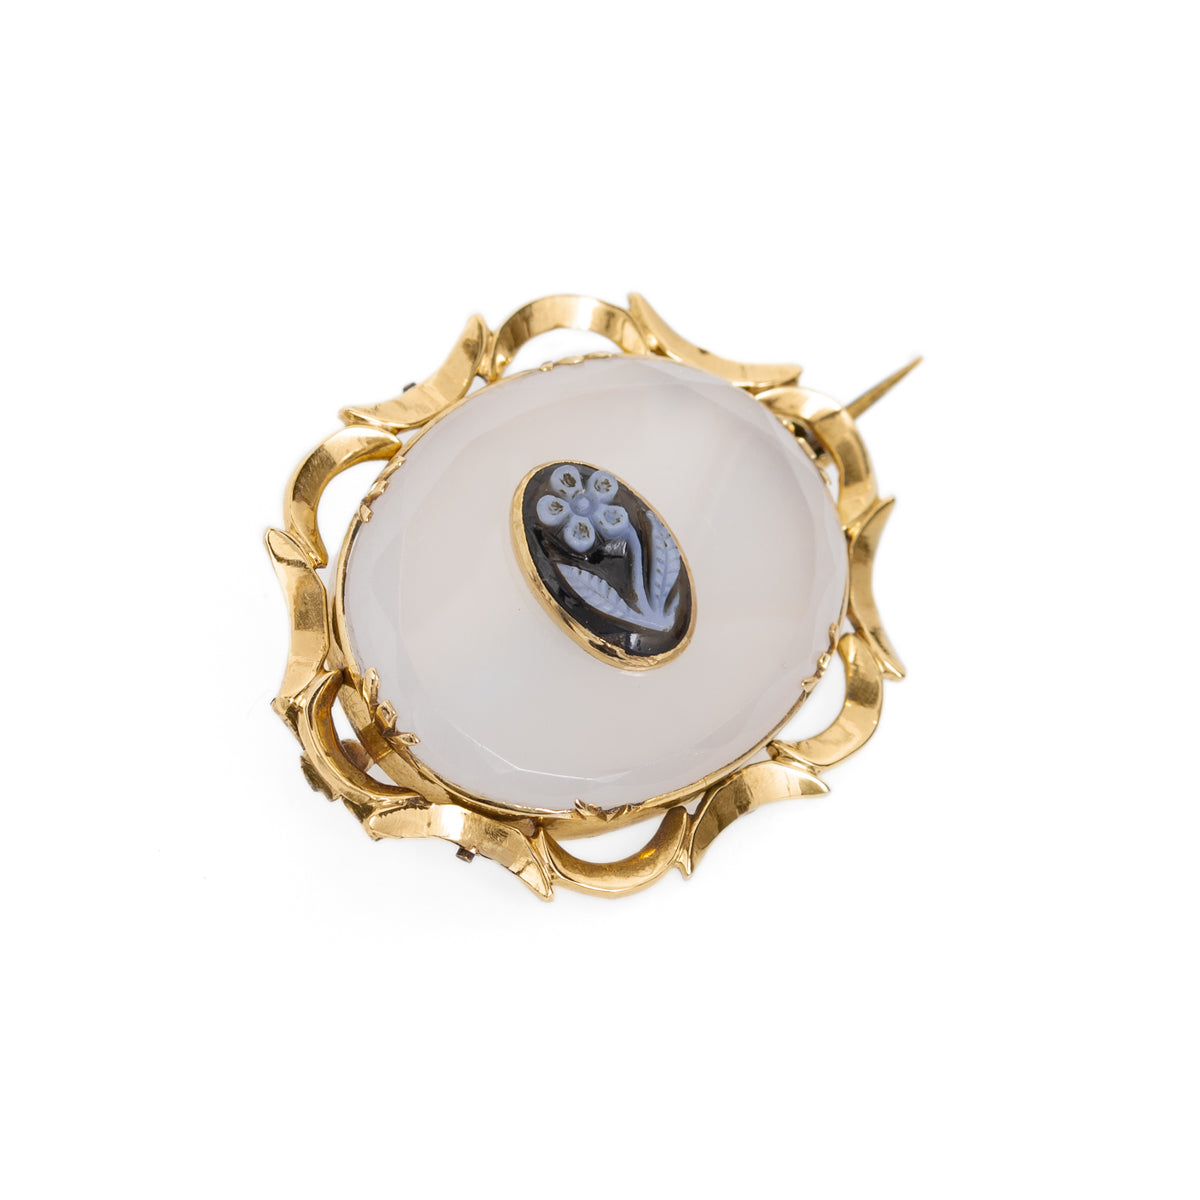 Antique Victorian Gold, Chalcedony & Carved Agate 2nd Period Mourning Brooch (Code A1043)